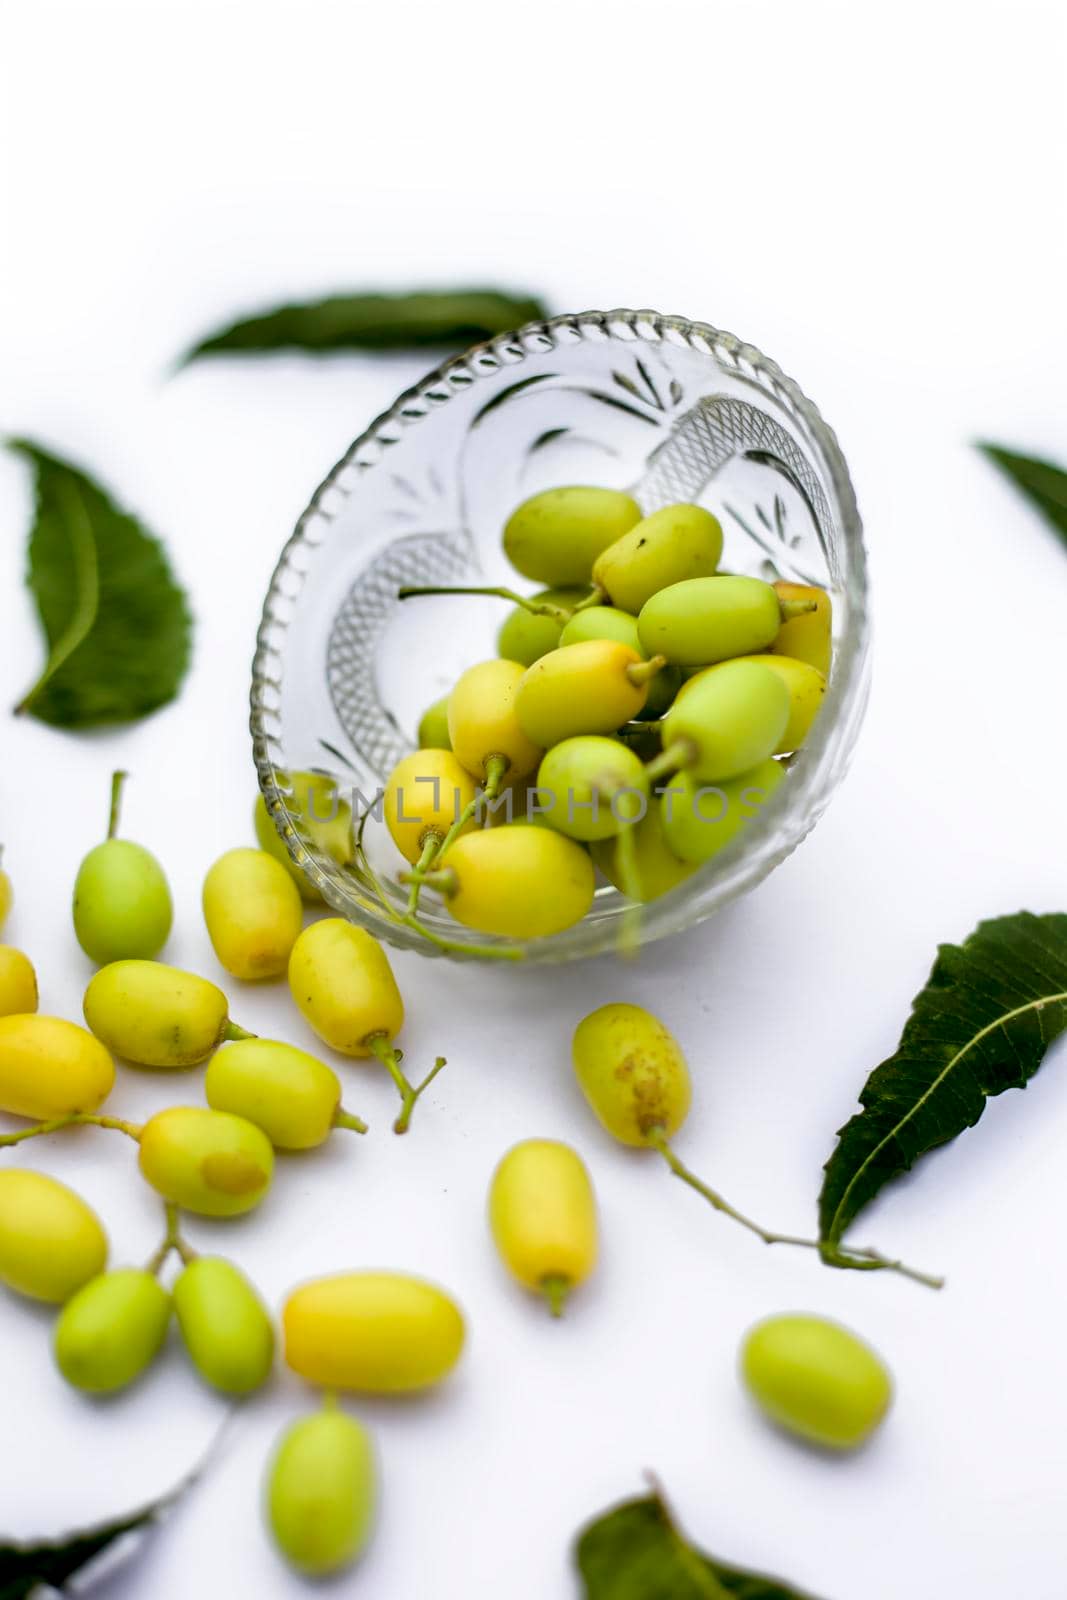 Neem fruit or nim fruit or Indian lilac fruit in a glass bowl isolated on white along with some fresh leaves also. by mirzamlk